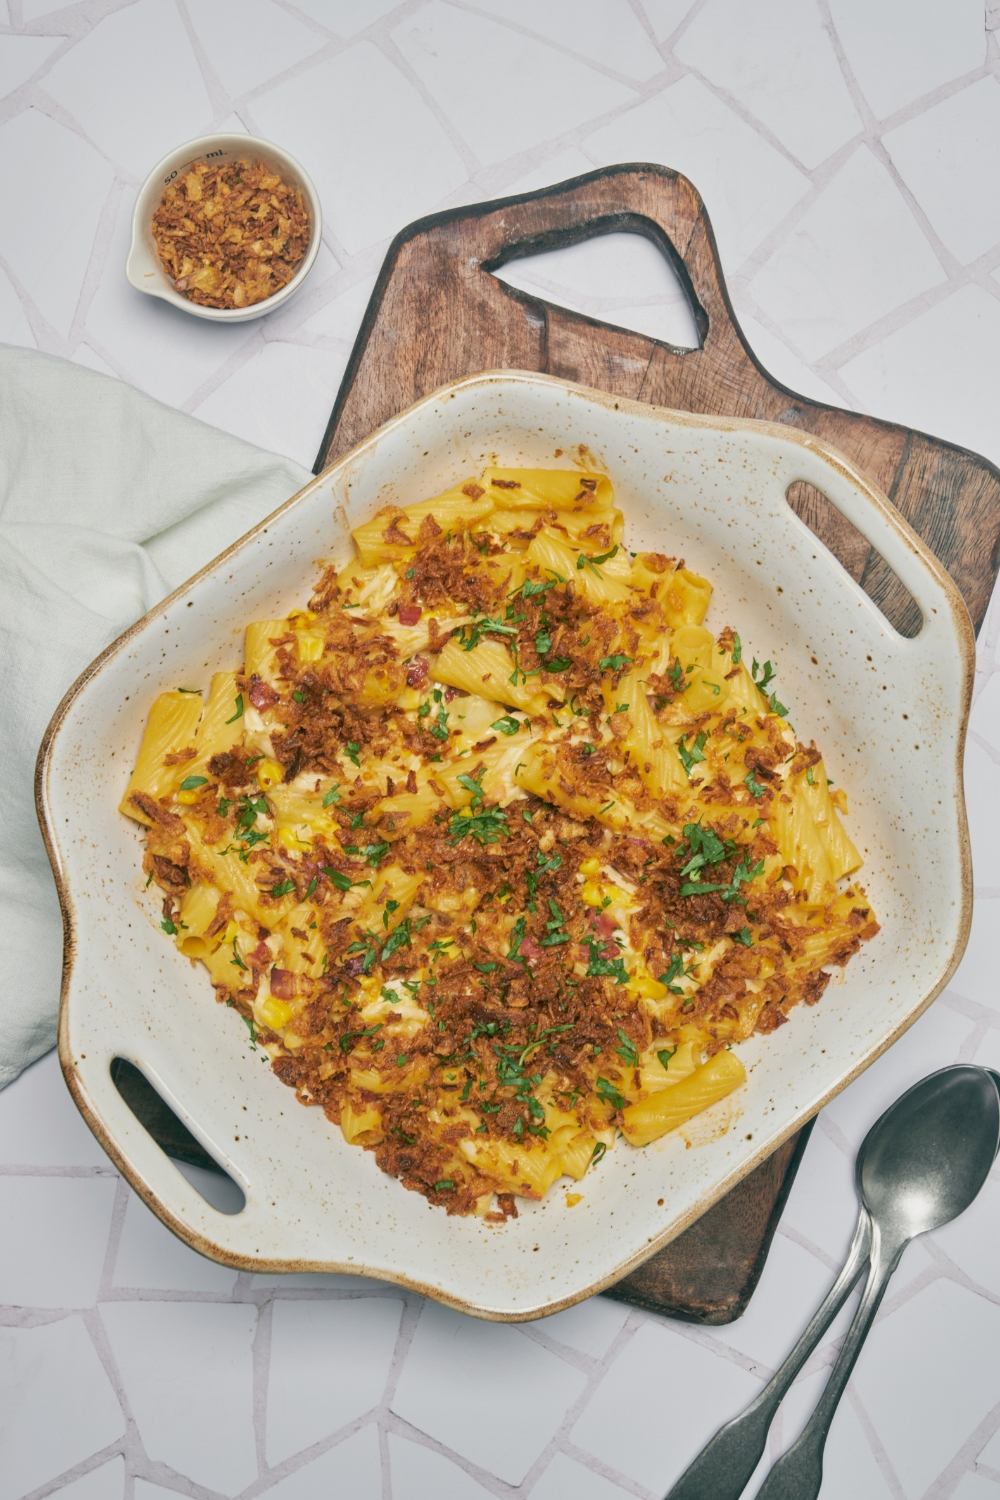 A baking dish filled with freshly baked chicken noodle casserole covered in french fried onions and fresh herbs.